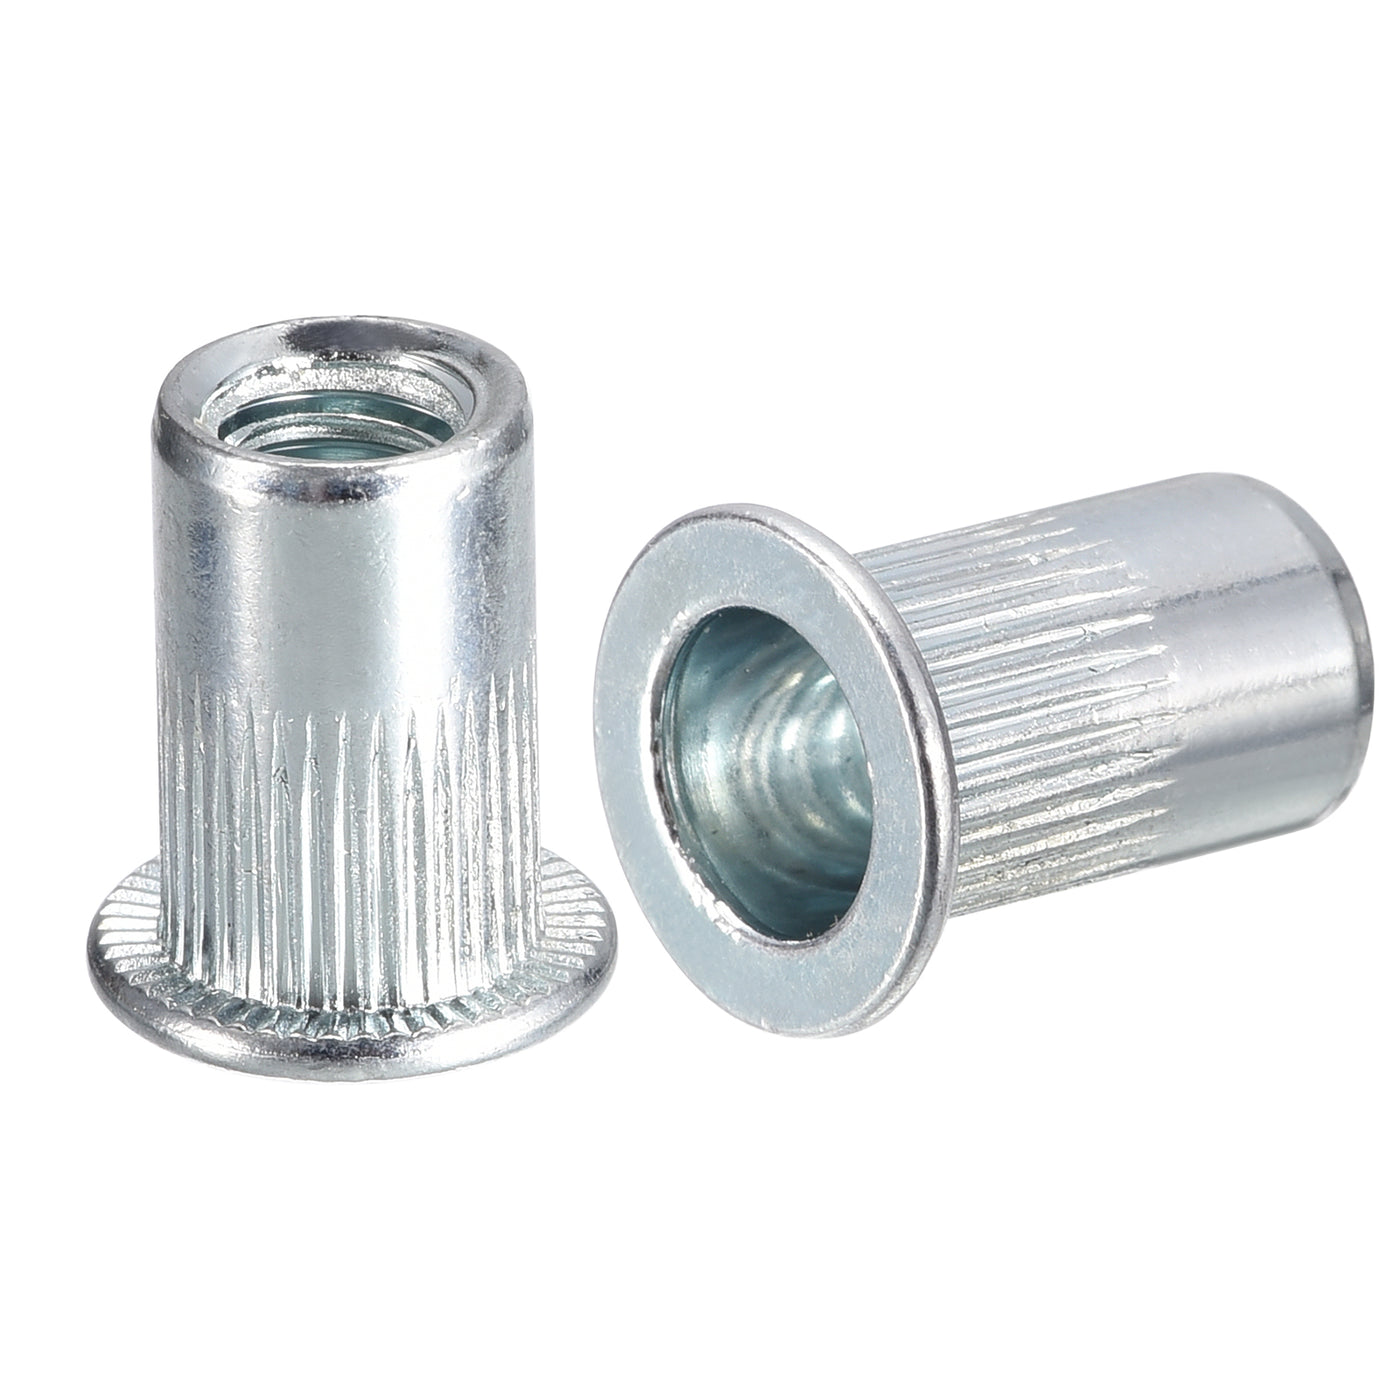 uxcell Uxcell Rivet Nuts, Carbon Steel Knurled Flat Head Threaded Insert Nuts for Metal, Plastic